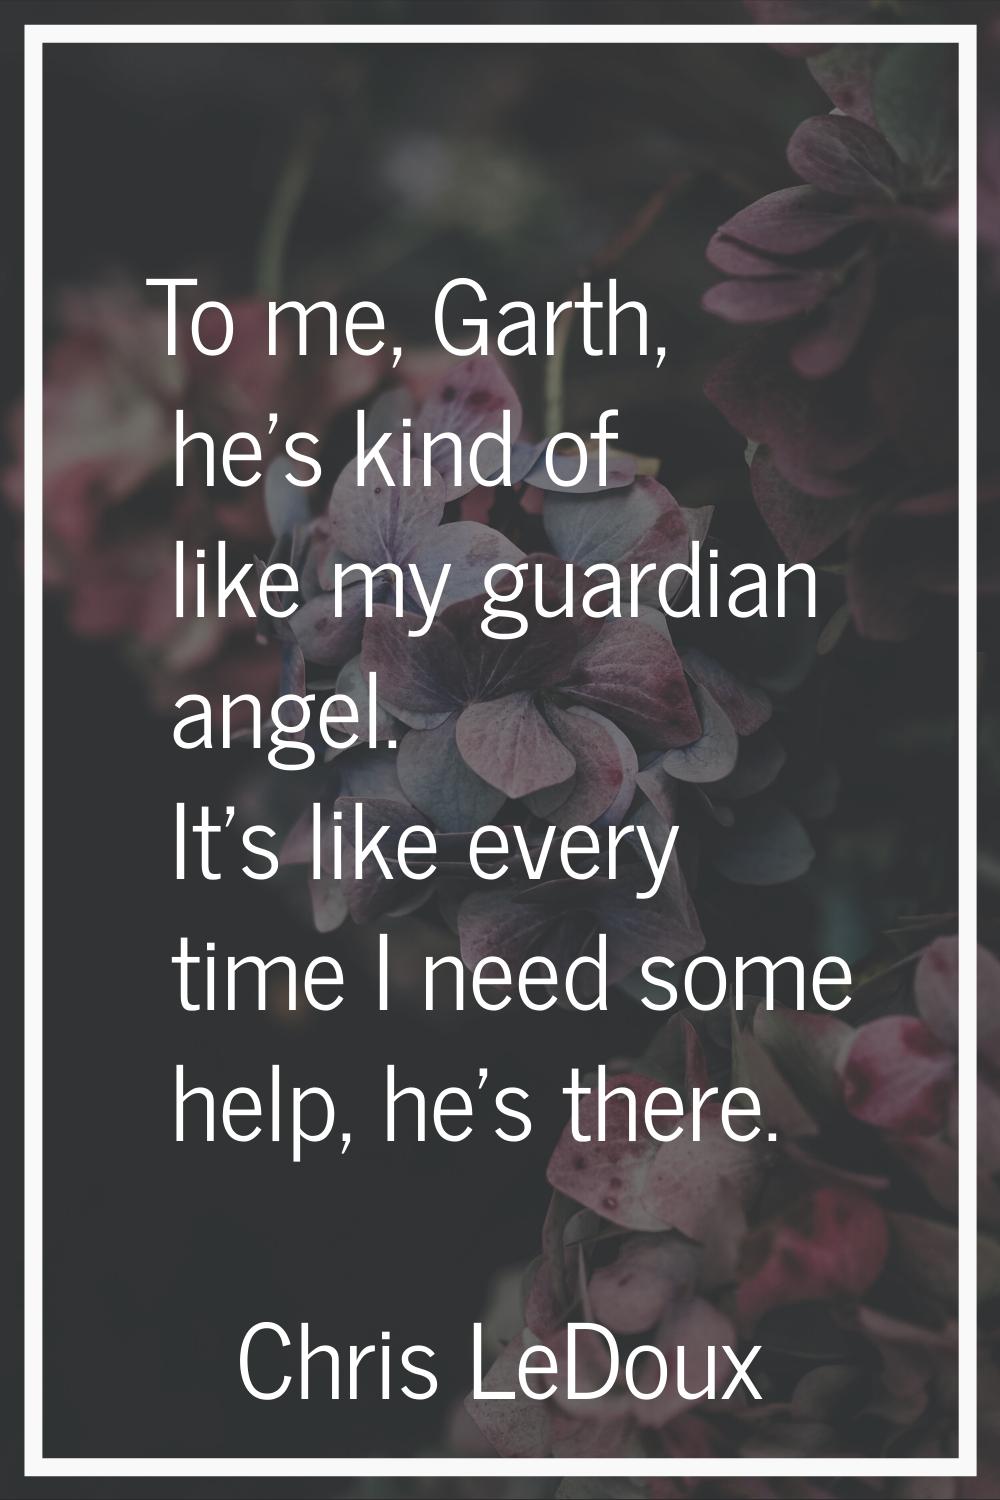 To me, Garth, he's kind of like my guardian angel. It's like every time I need some help, he's ther